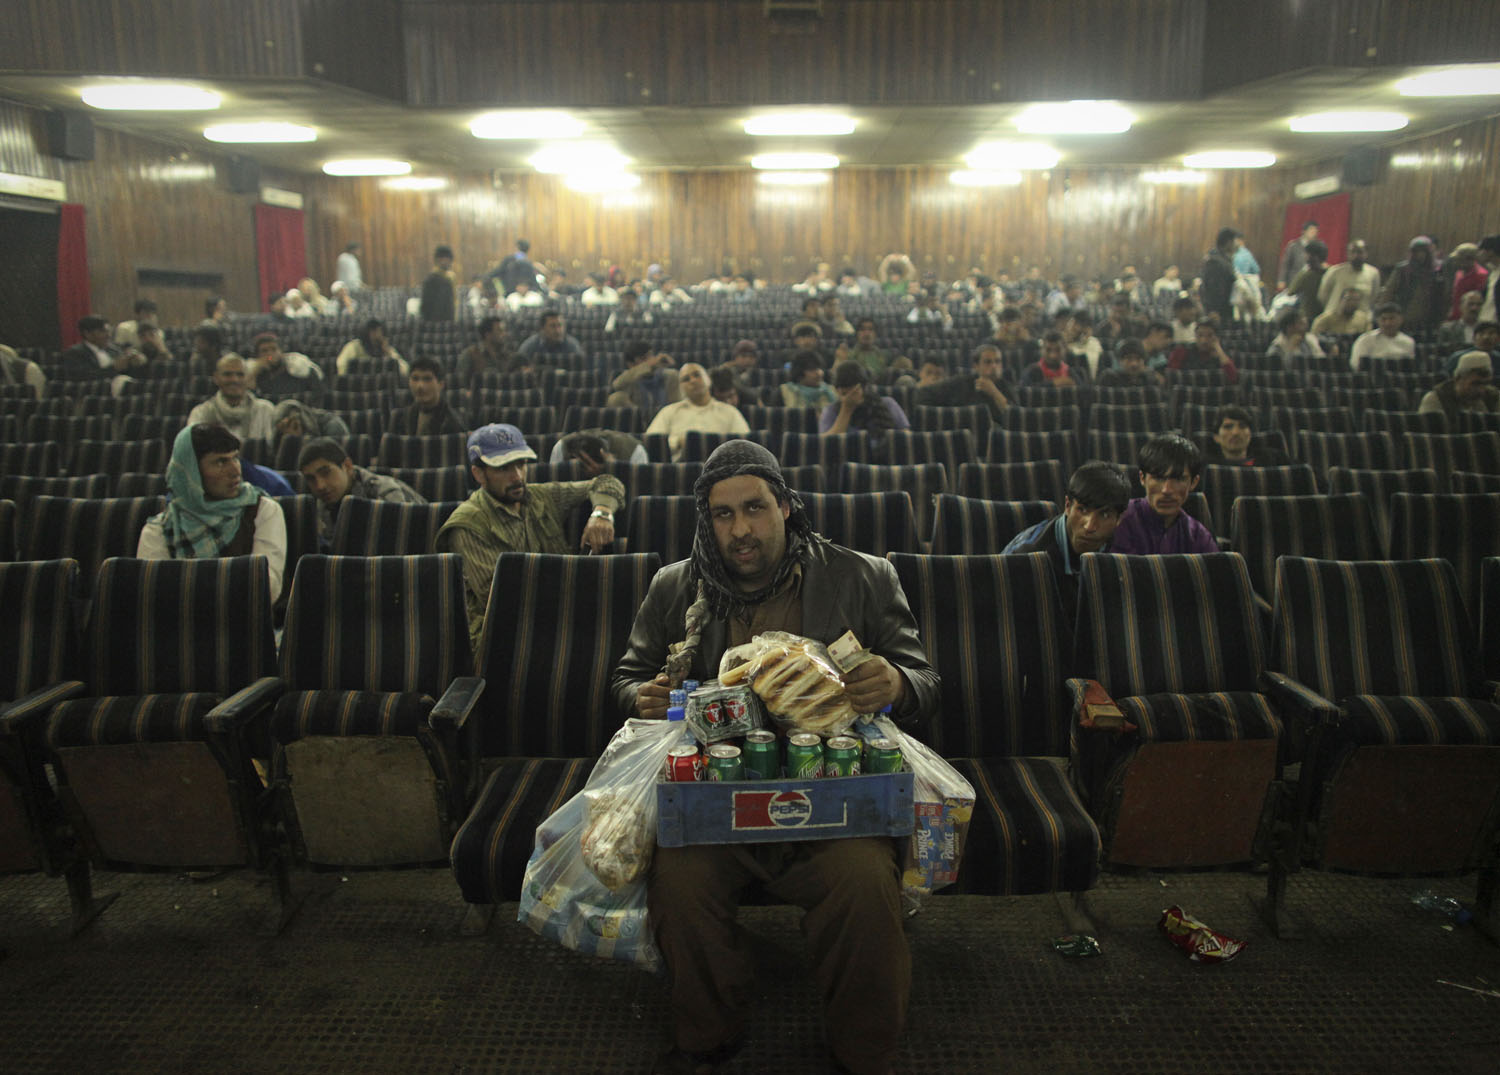 An employee of Cinema Pamir sells refreshments during the movie interval in Kabul